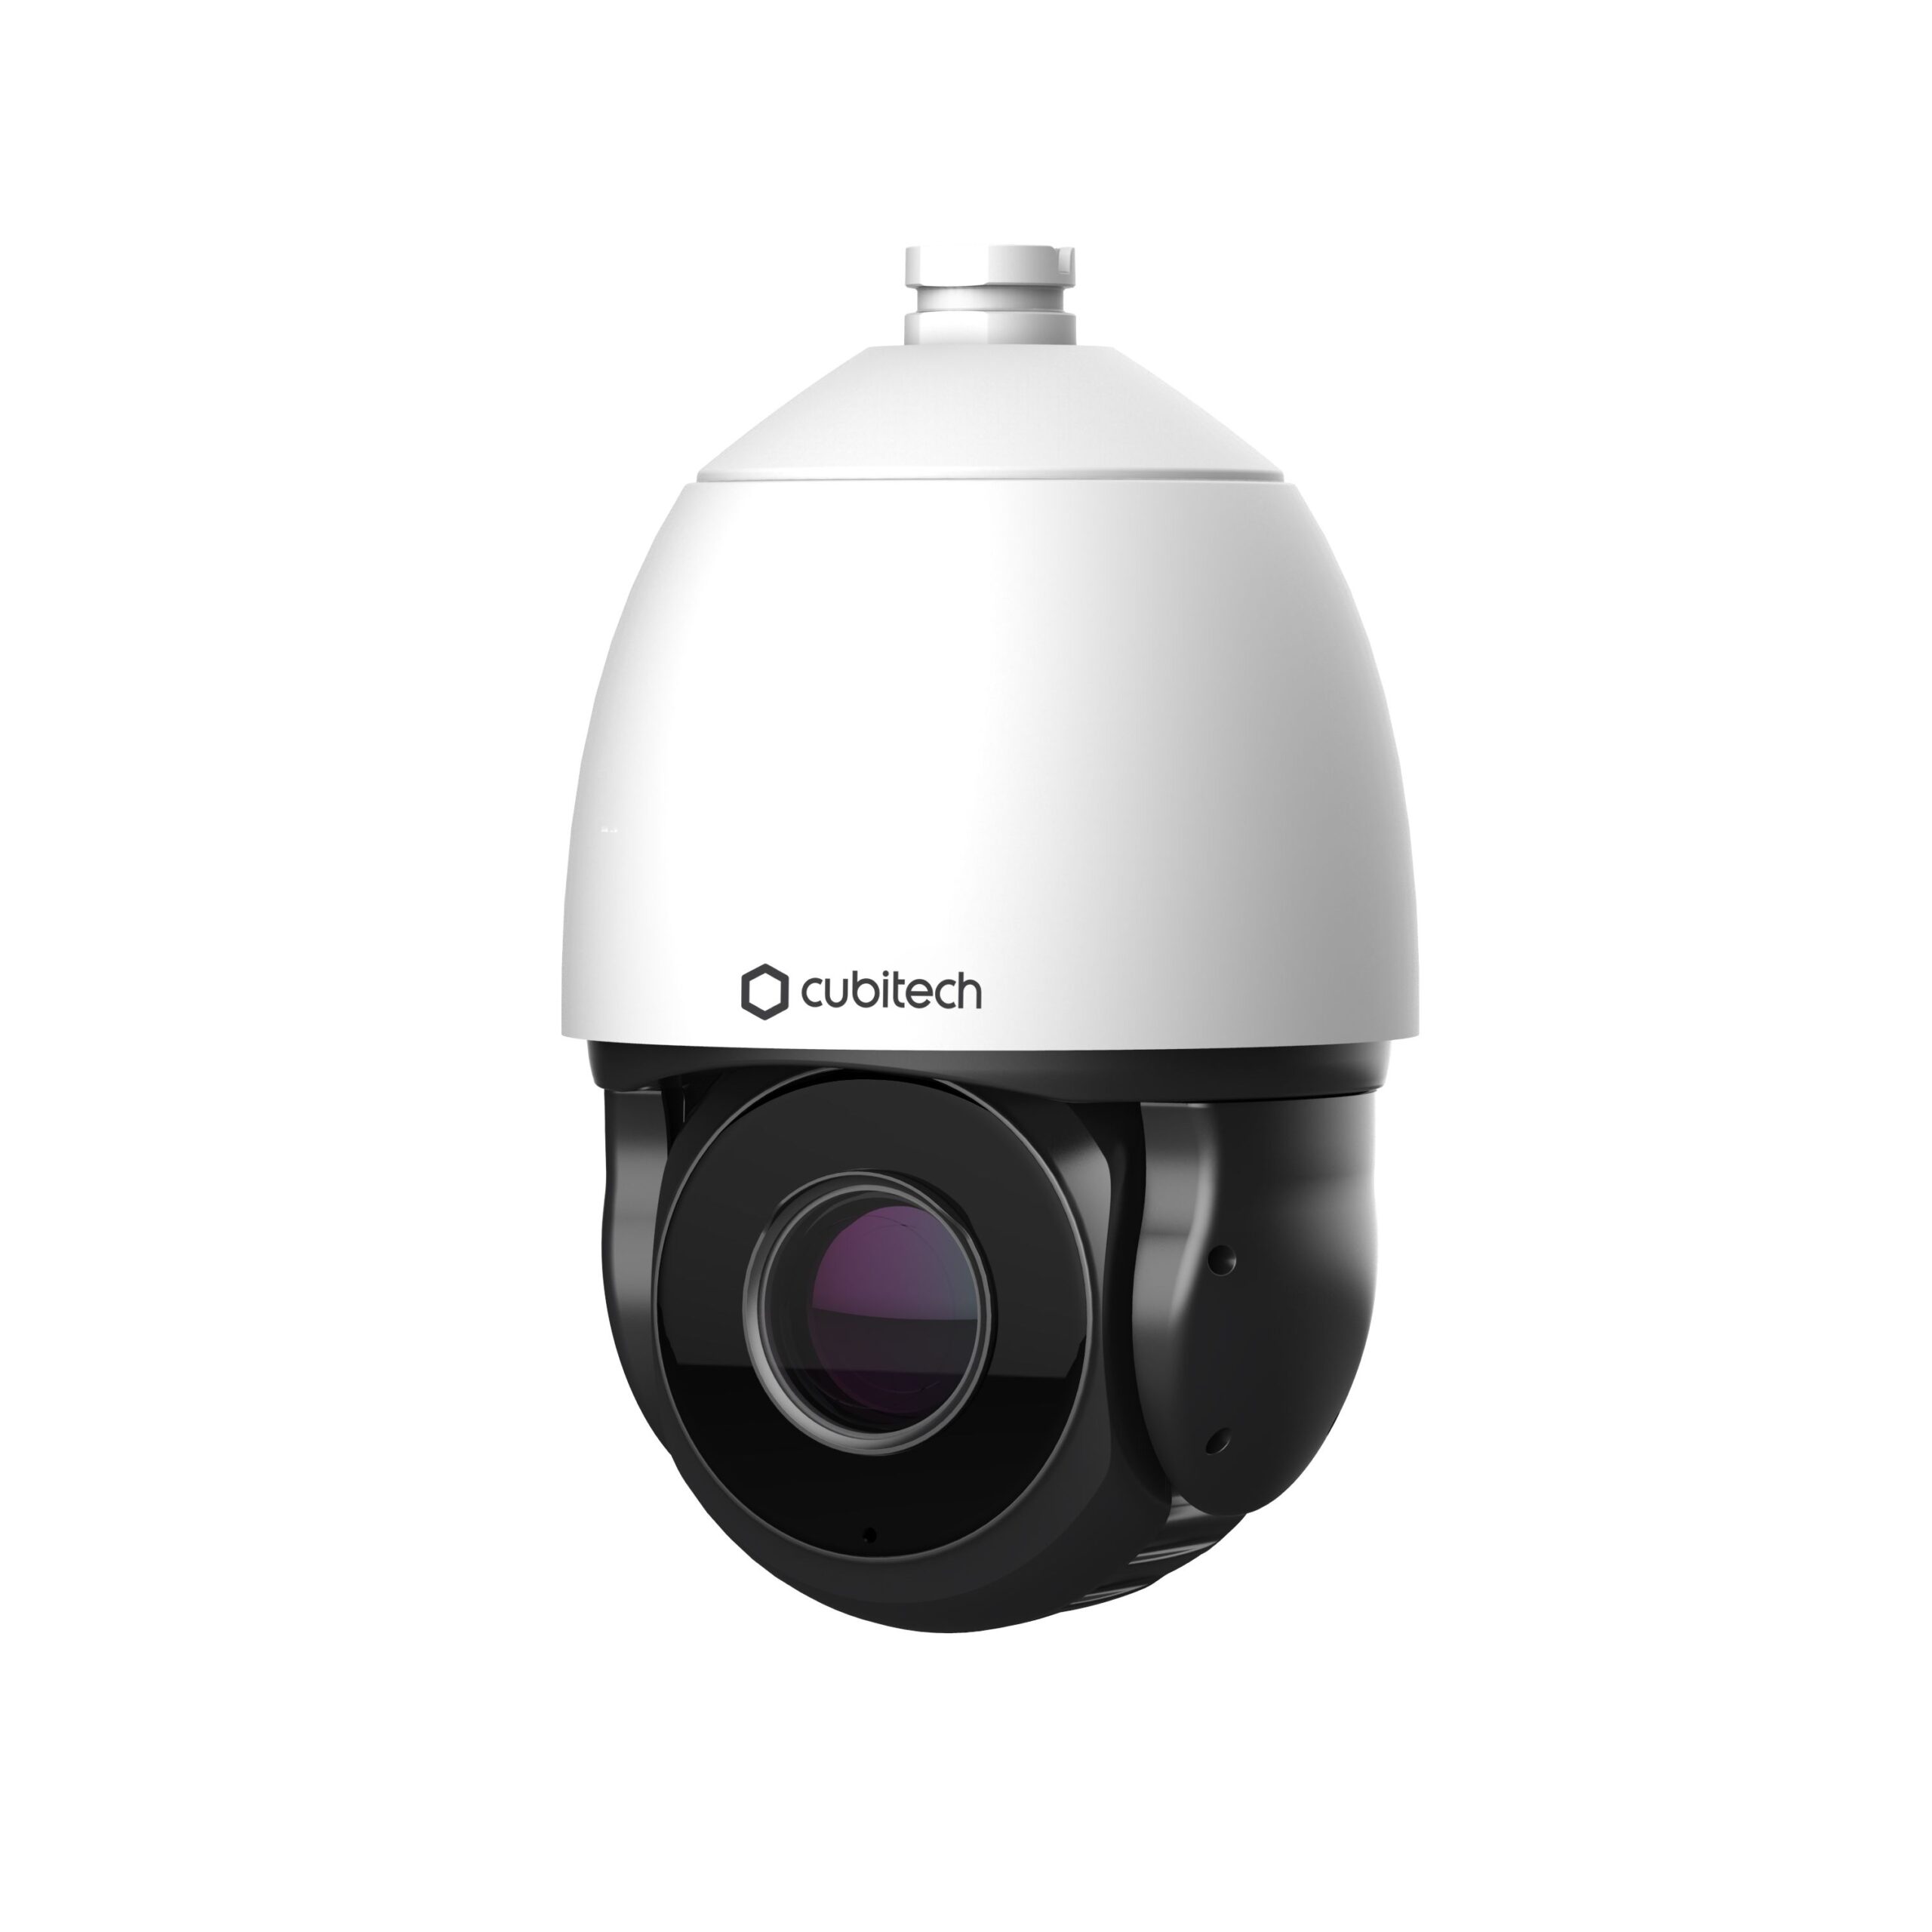 CB-PI3030XL 3MP, IR High Speed Dome with 30X Optical Zoom & 400 Presets